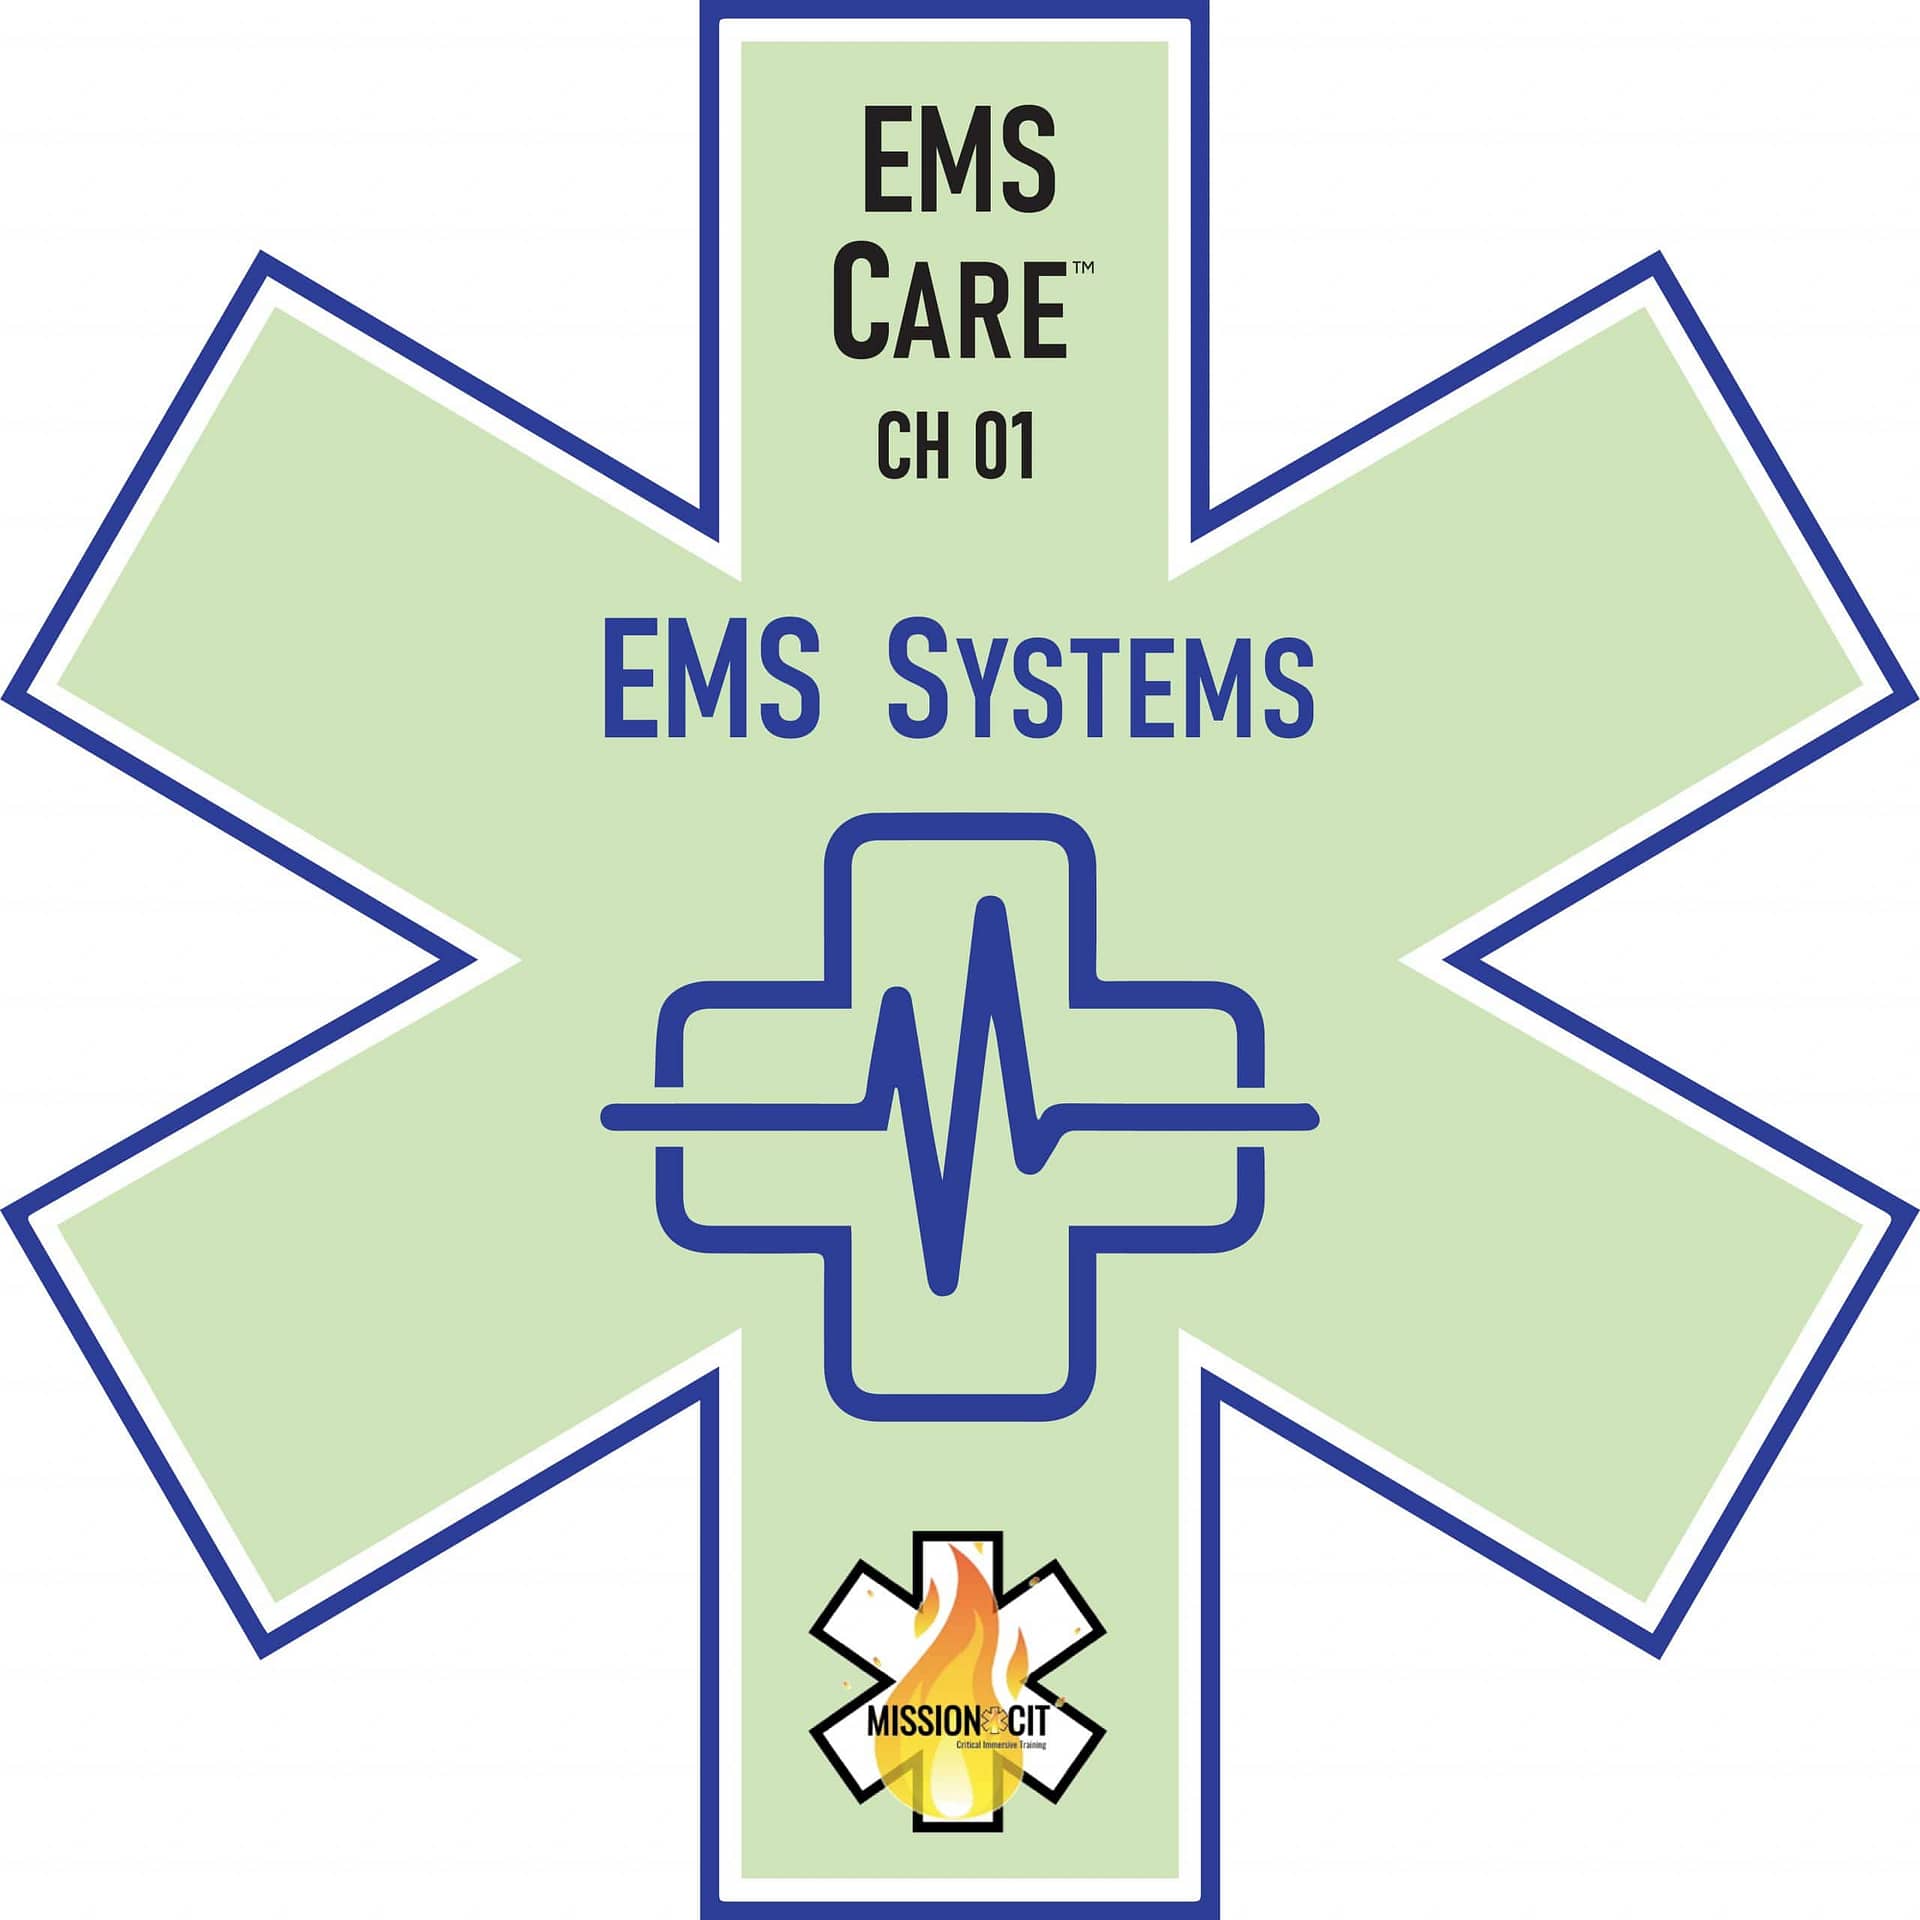 EMS Care Chapter 01 | EMS SYSTEMS for the EMT